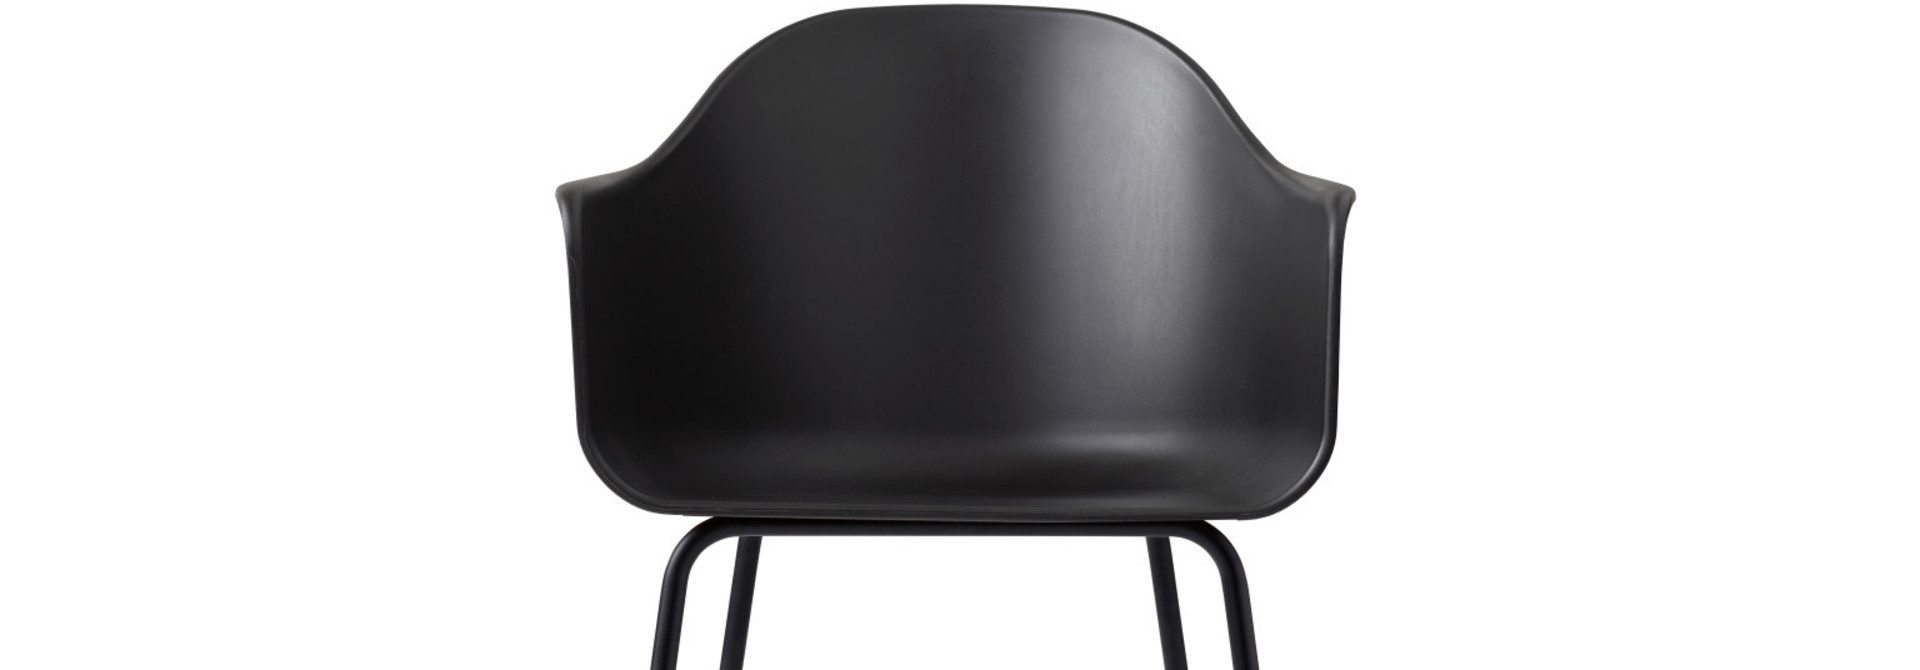 Harbour Dining chair - Steel base Black